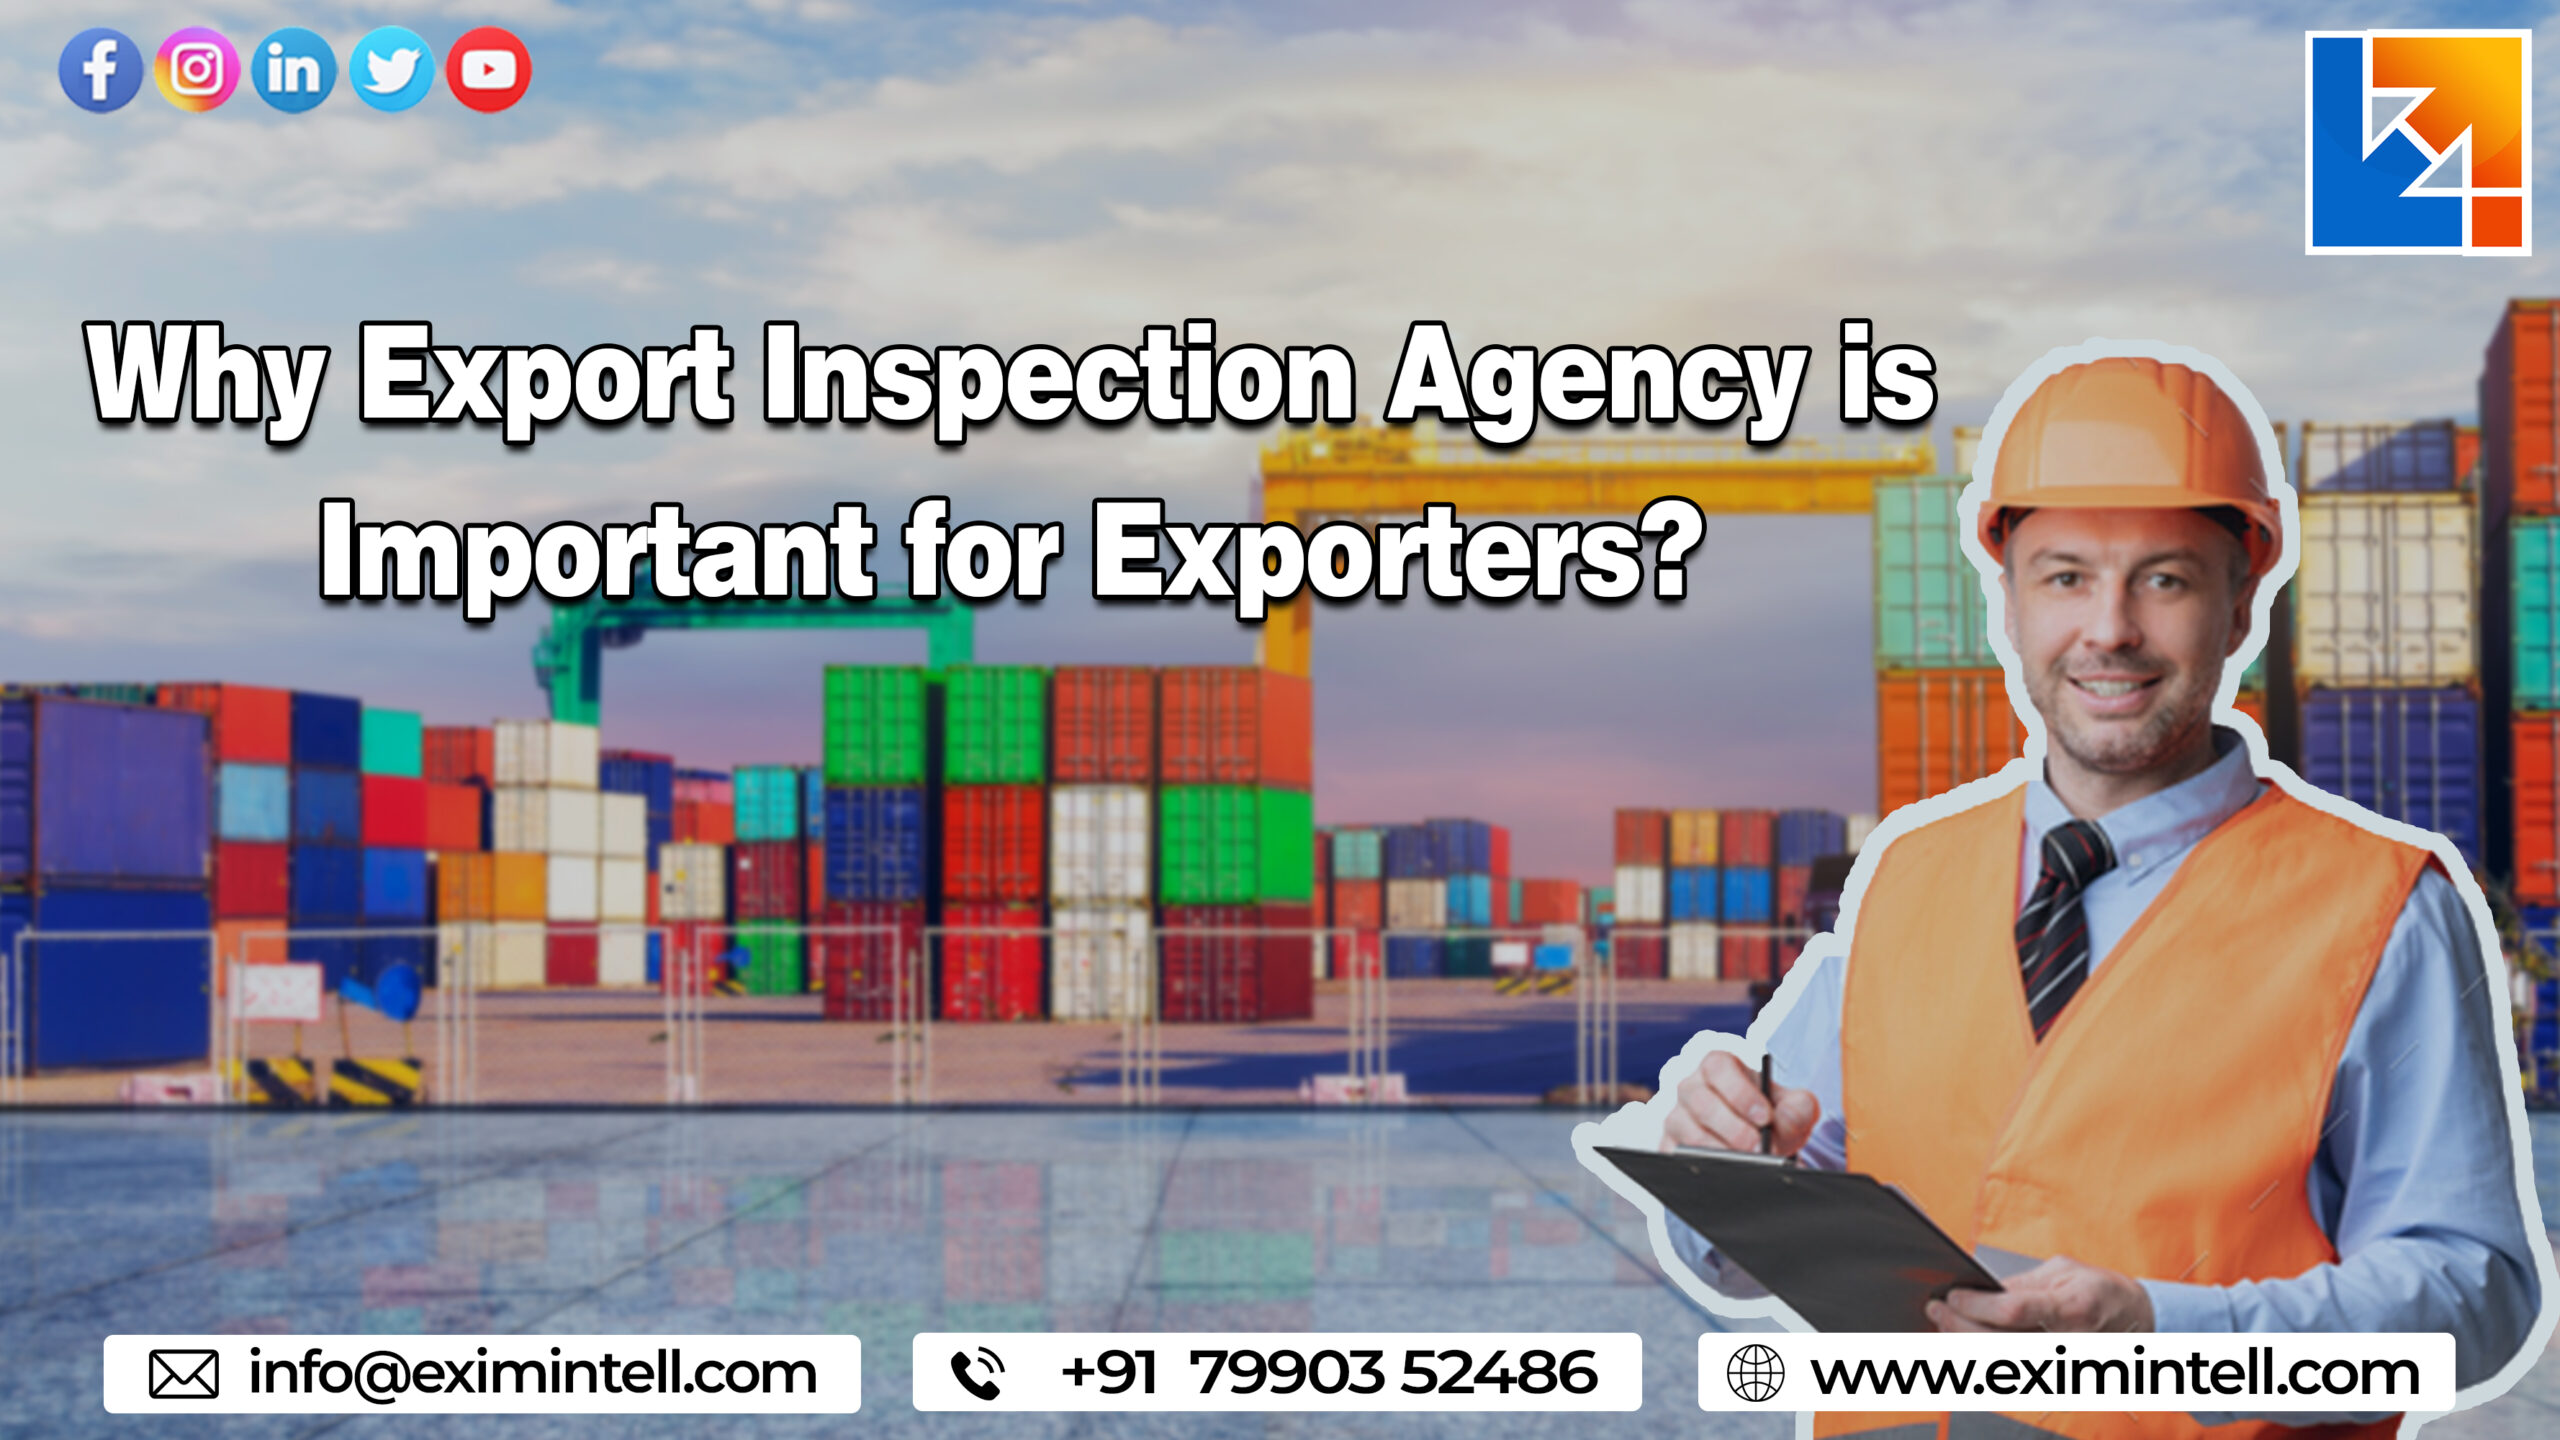 Why Export Inspection Agency is Important for Exporters?